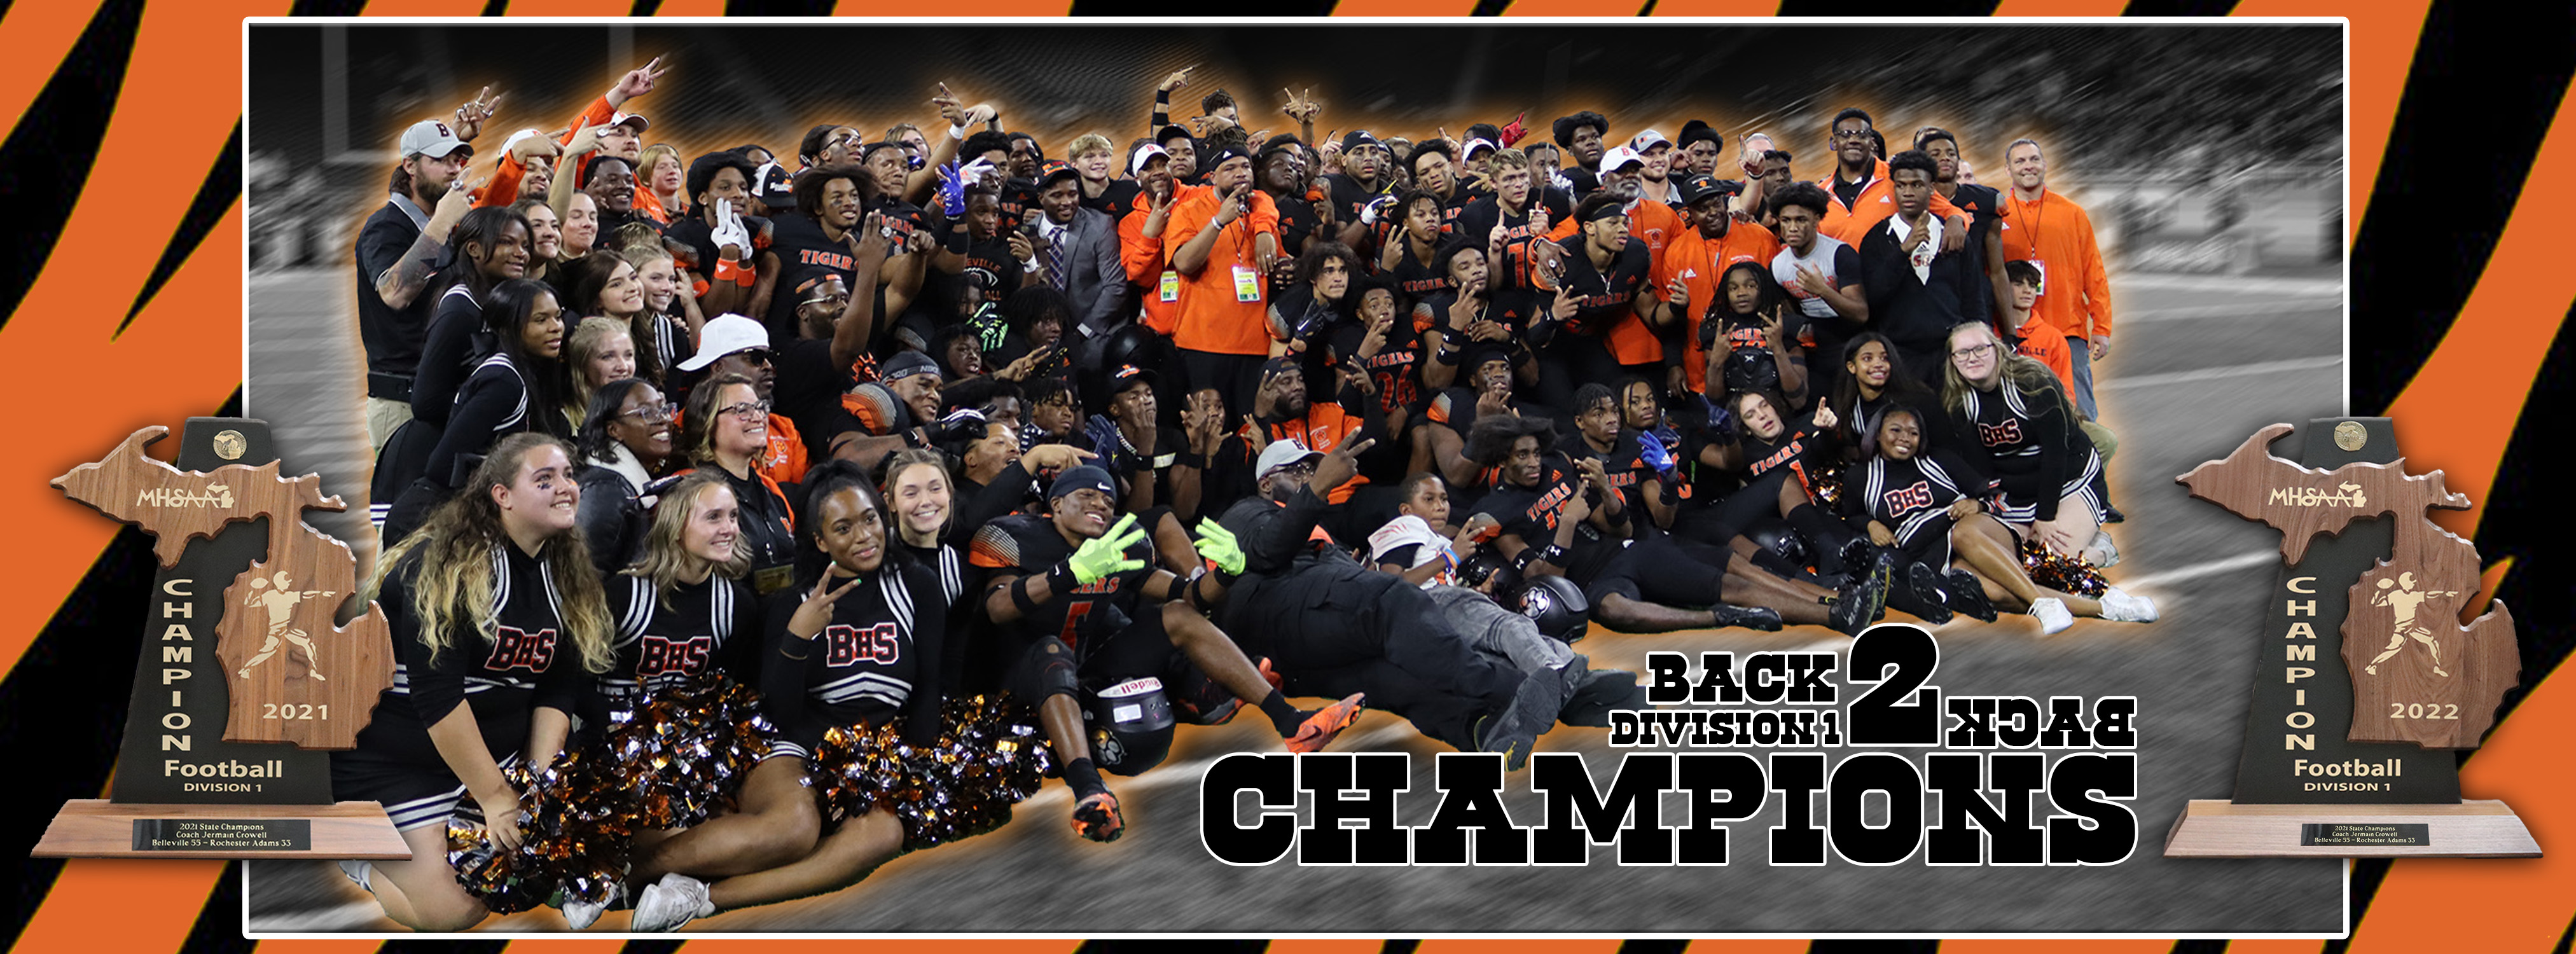 BHS Football - Back to Back